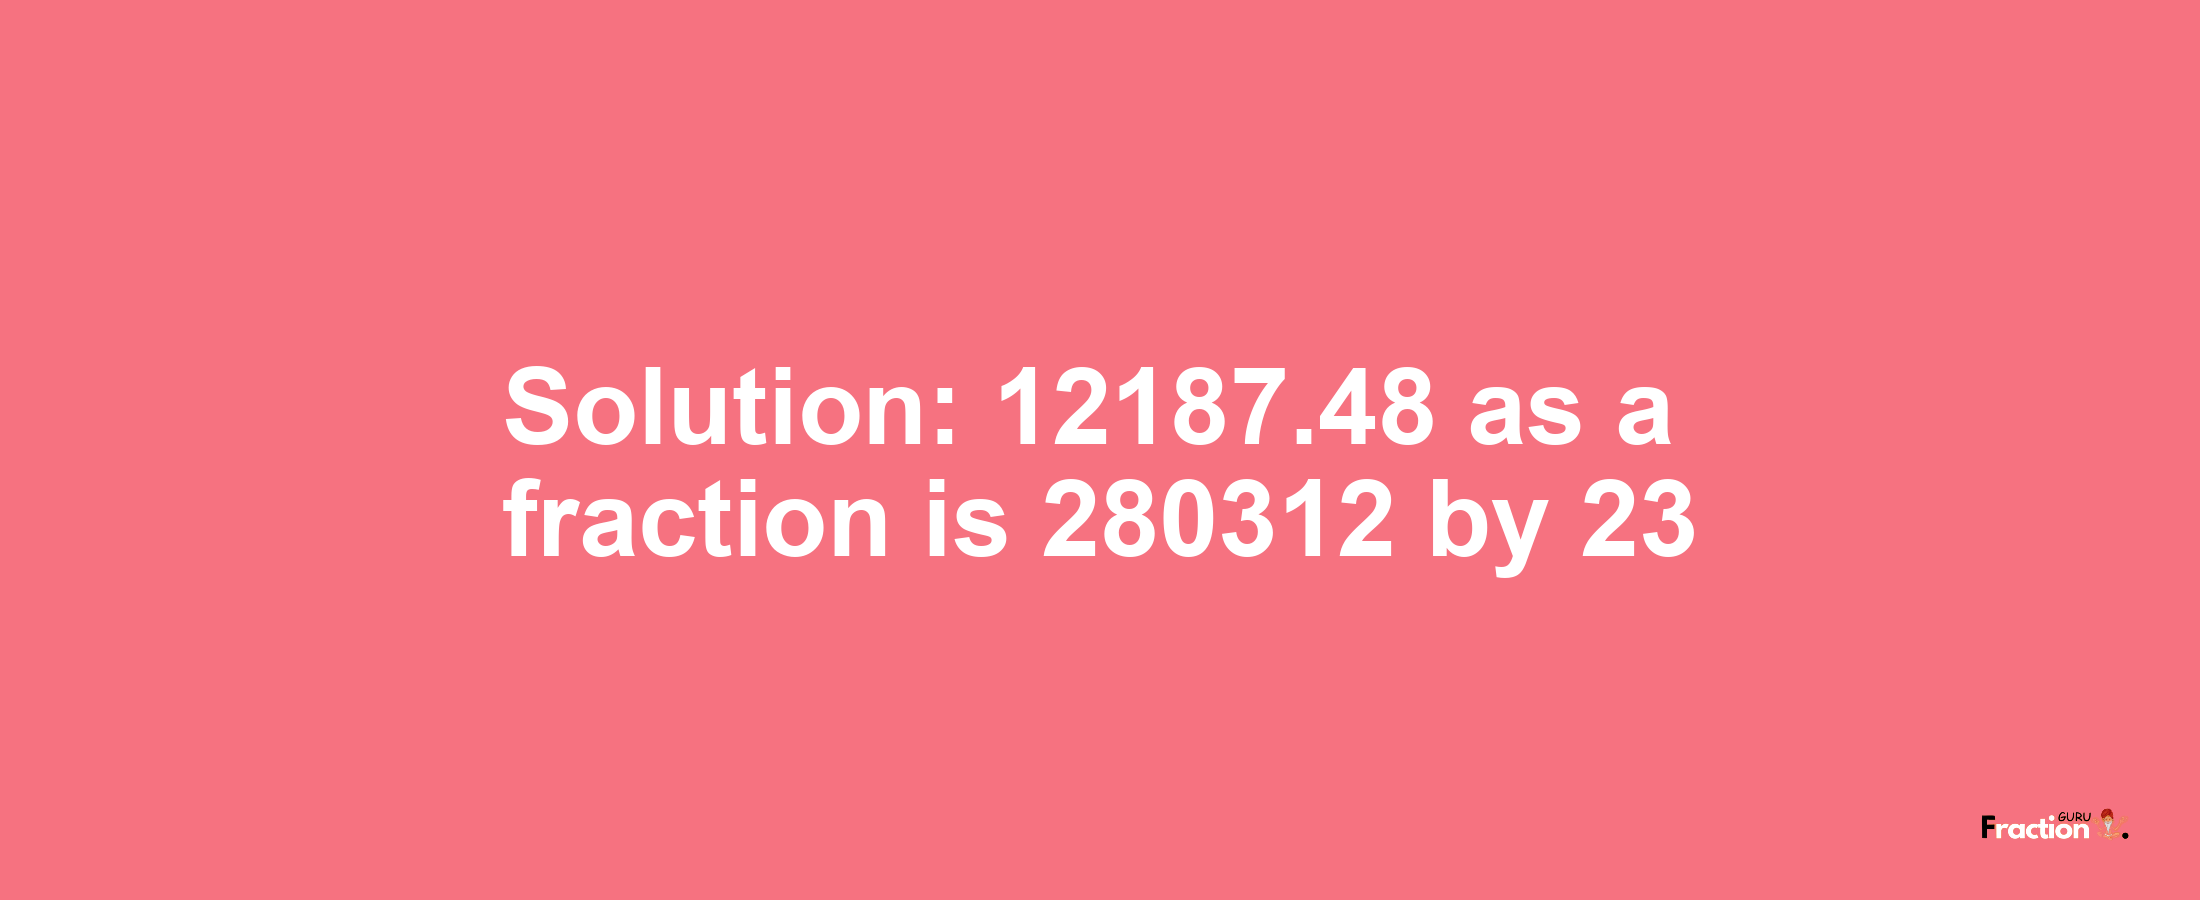 Solution:12187.48 as a fraction is 280312/23